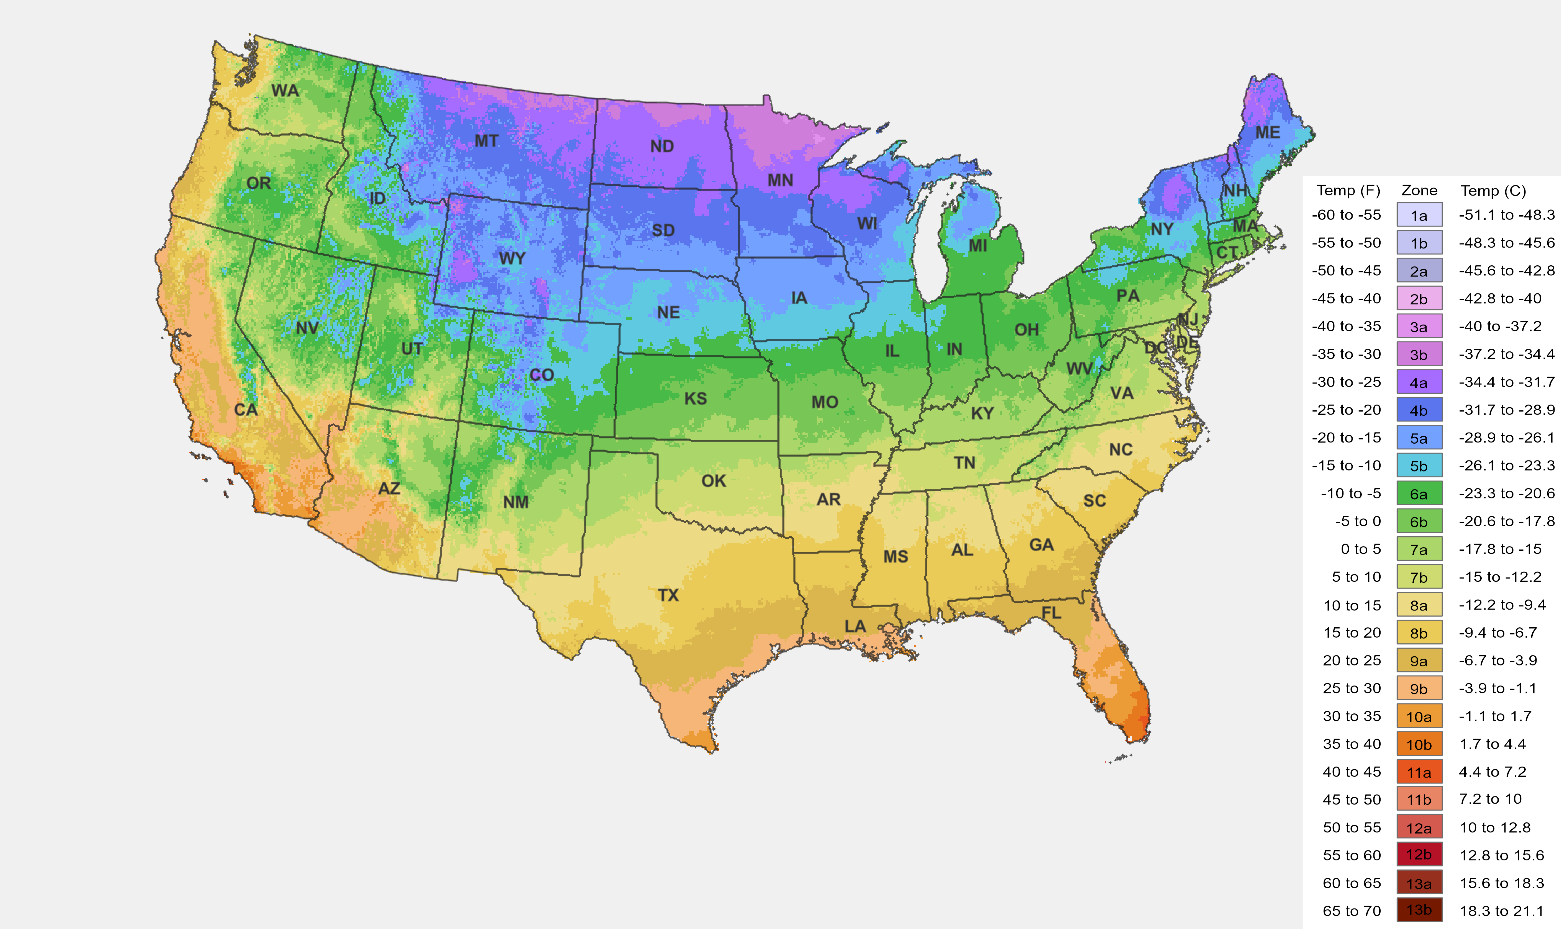 This image shows the Zone Map for the United States, this helps gardeners and arborists know when and where to plant.